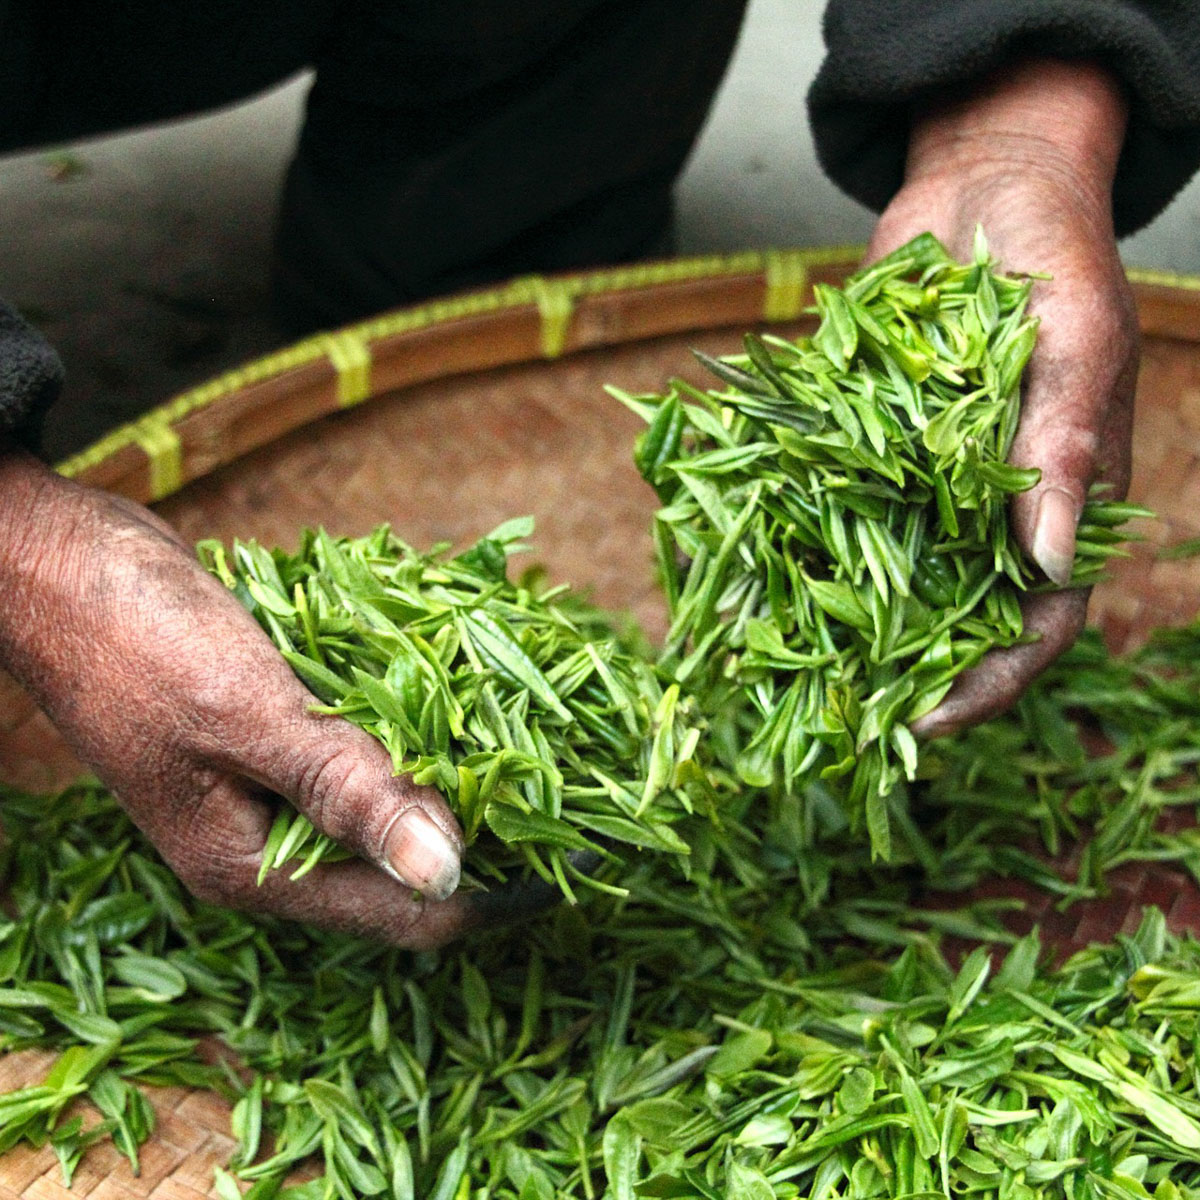 farmer gathering tea leaves in his hands with basket underneath